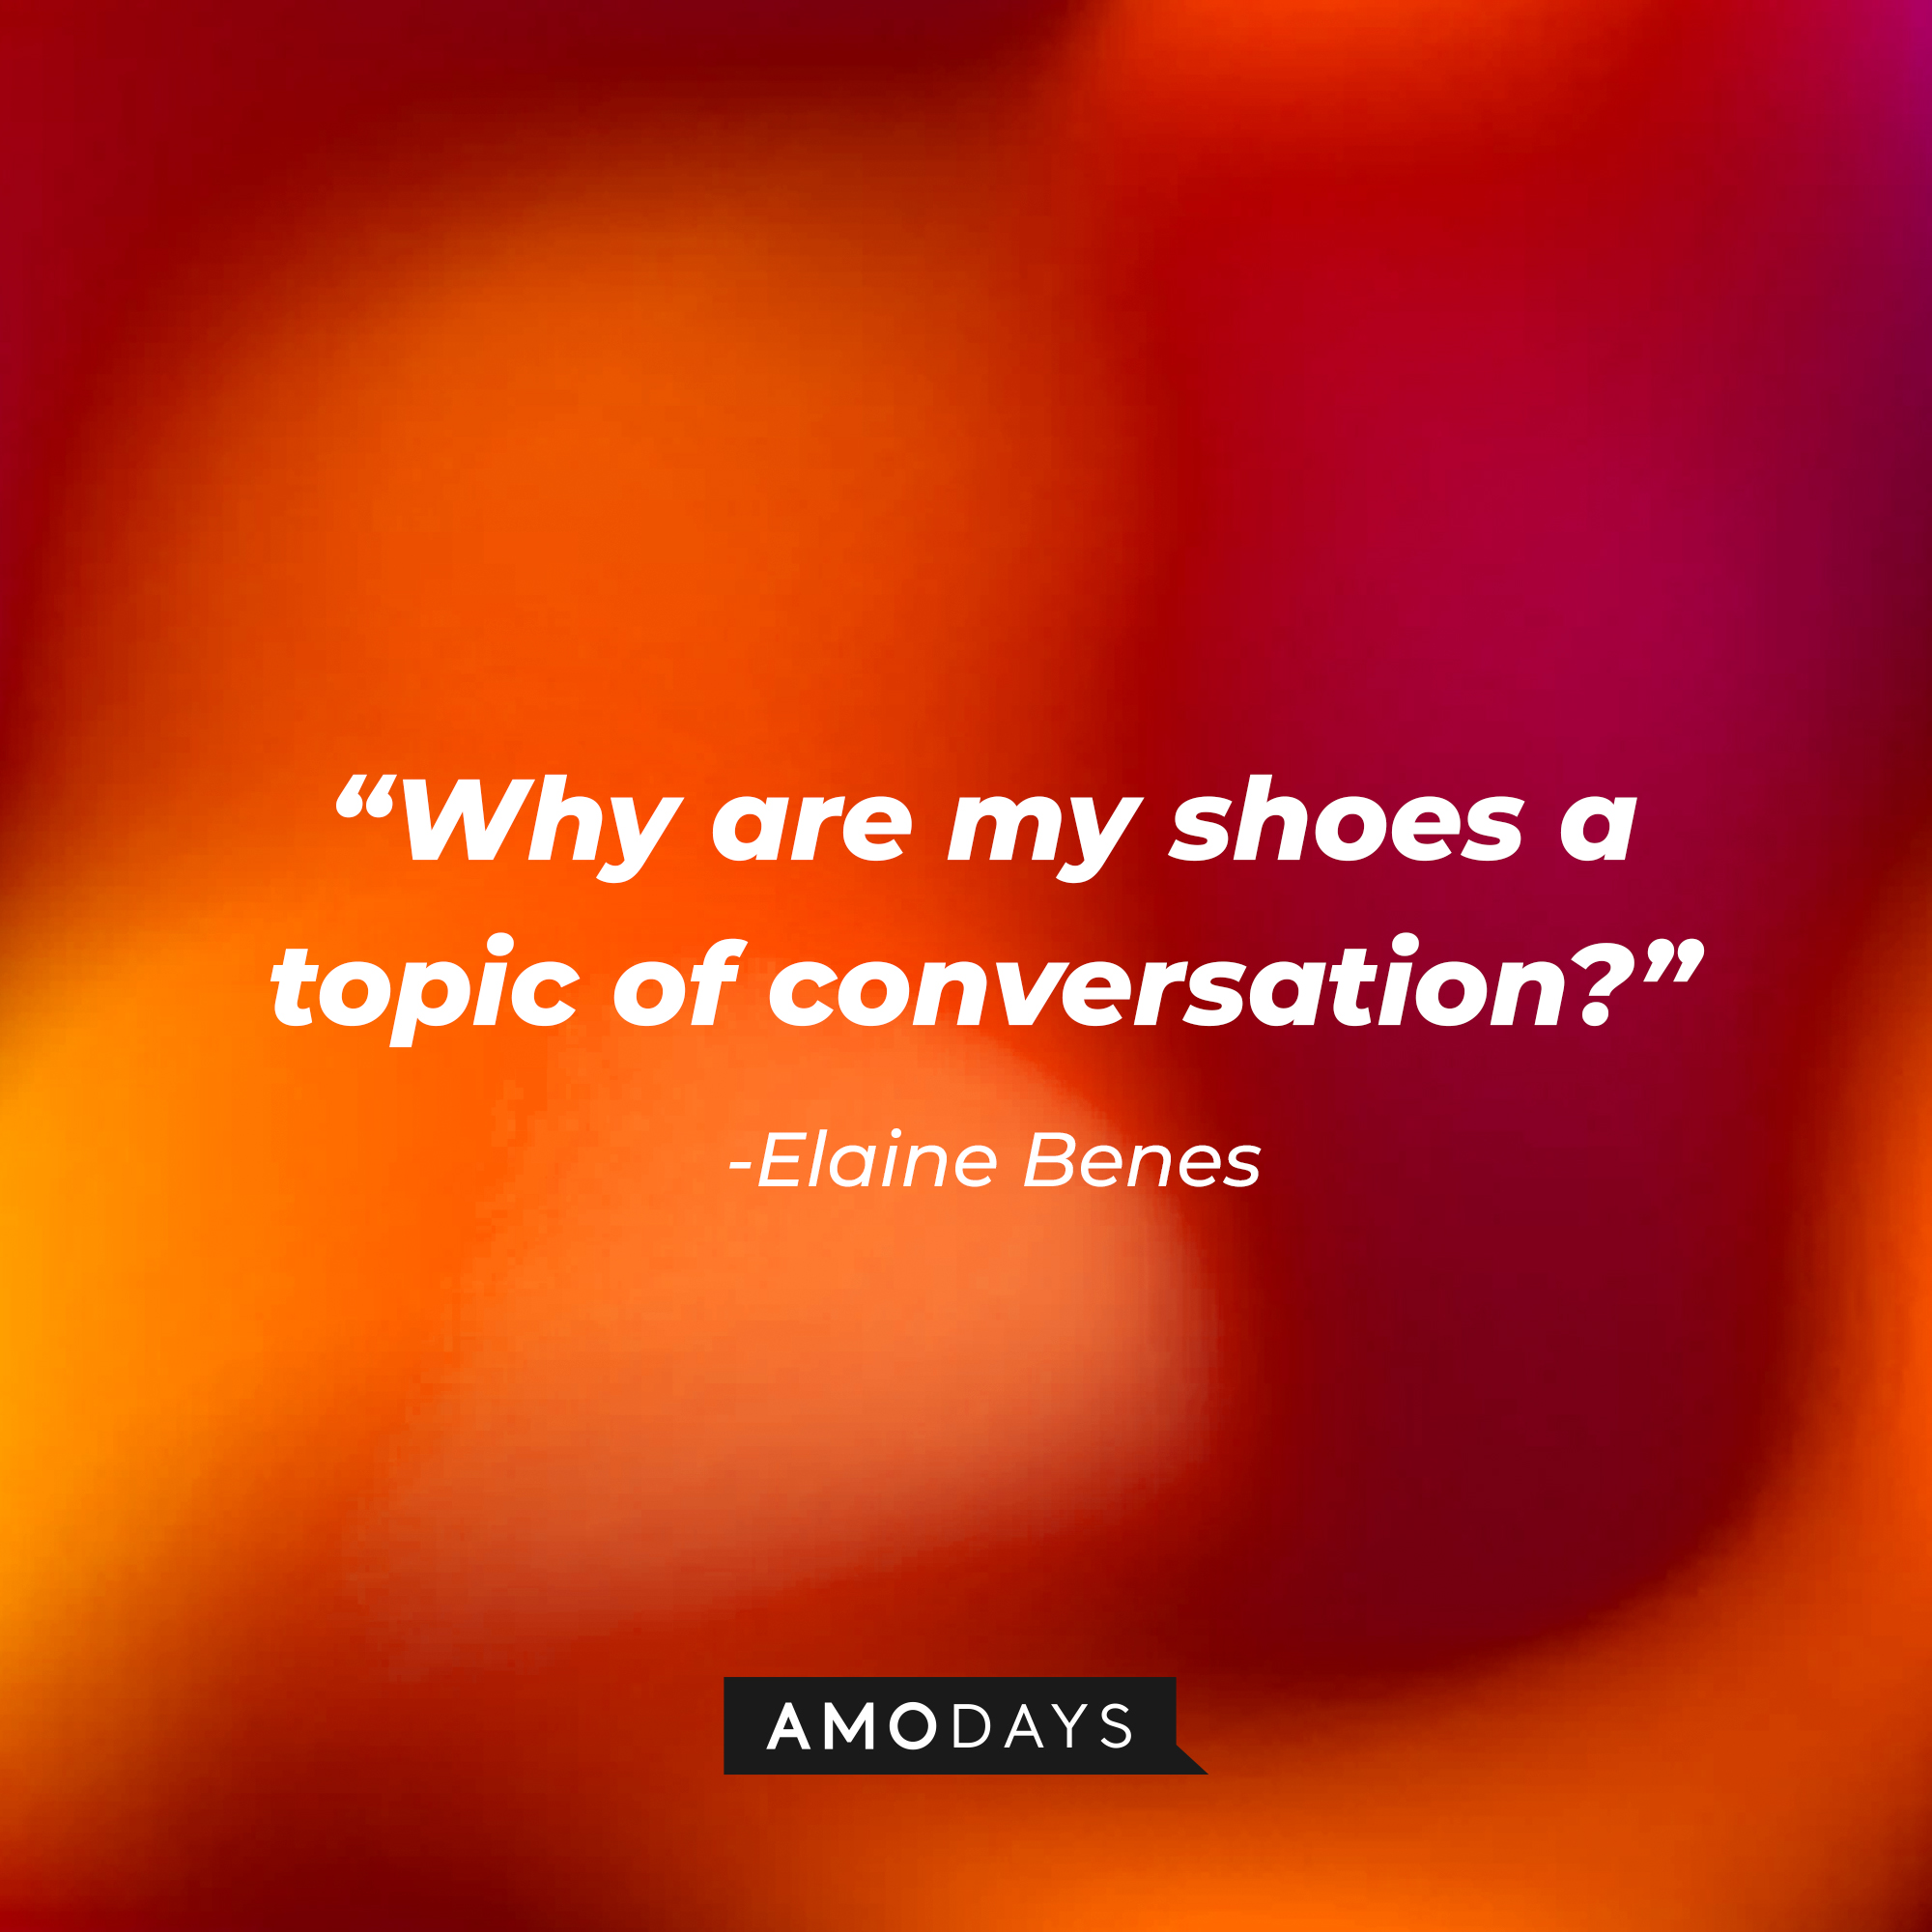 Elaine Benes’ quote: “Why are my shoes a topic of conversation?” | Source: Amodays